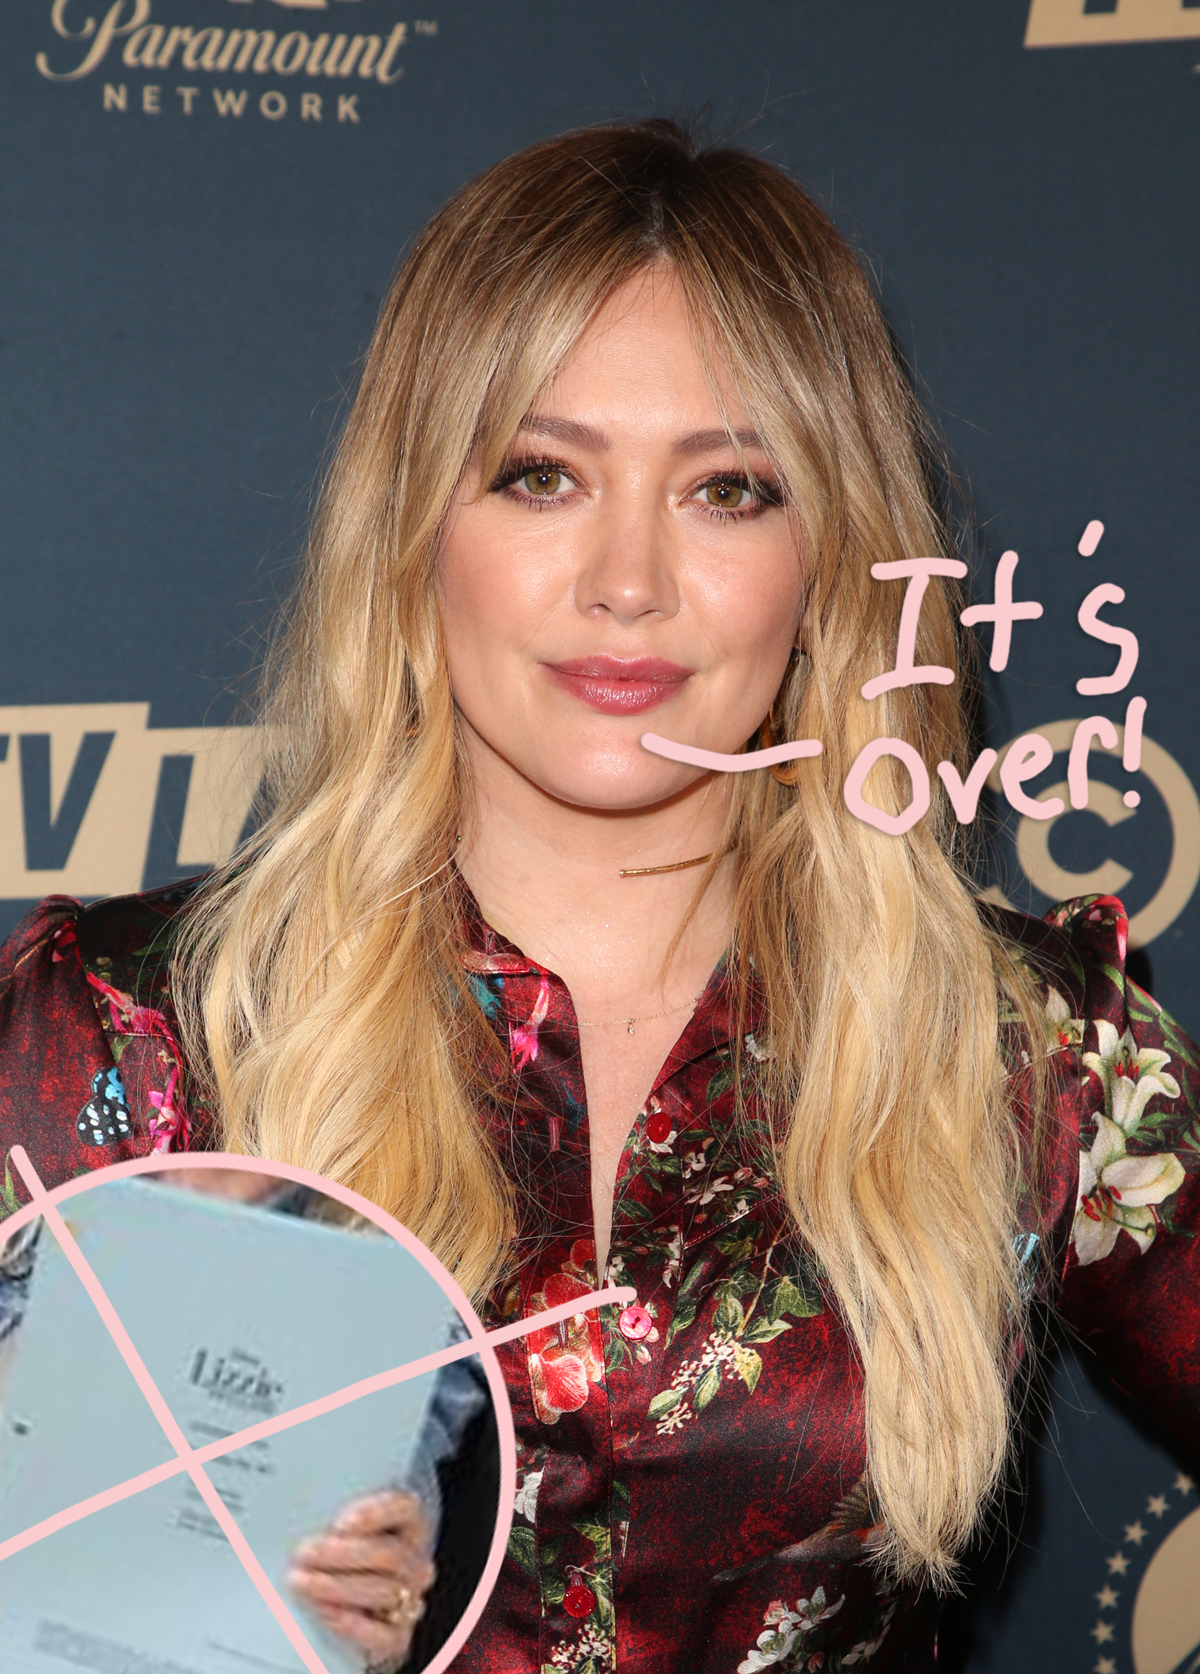 Hilary Duff shares why she 'really didn't want to be Lizzie